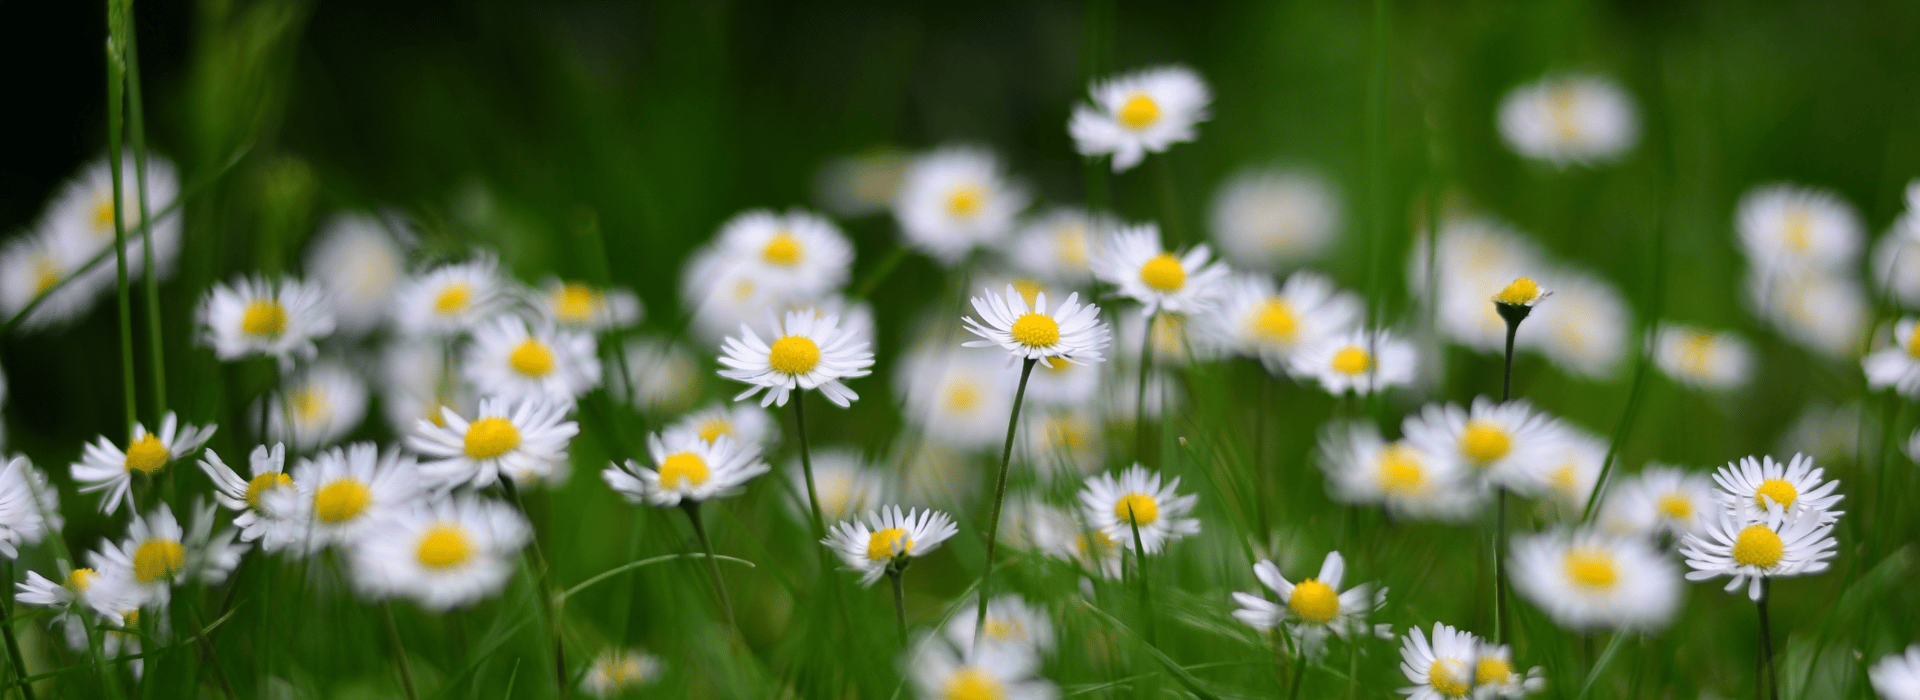 Close up of daisies in grass | Natural skincare – what’s the big deal? | Shine Body & Bath Chakra Soap | Blog